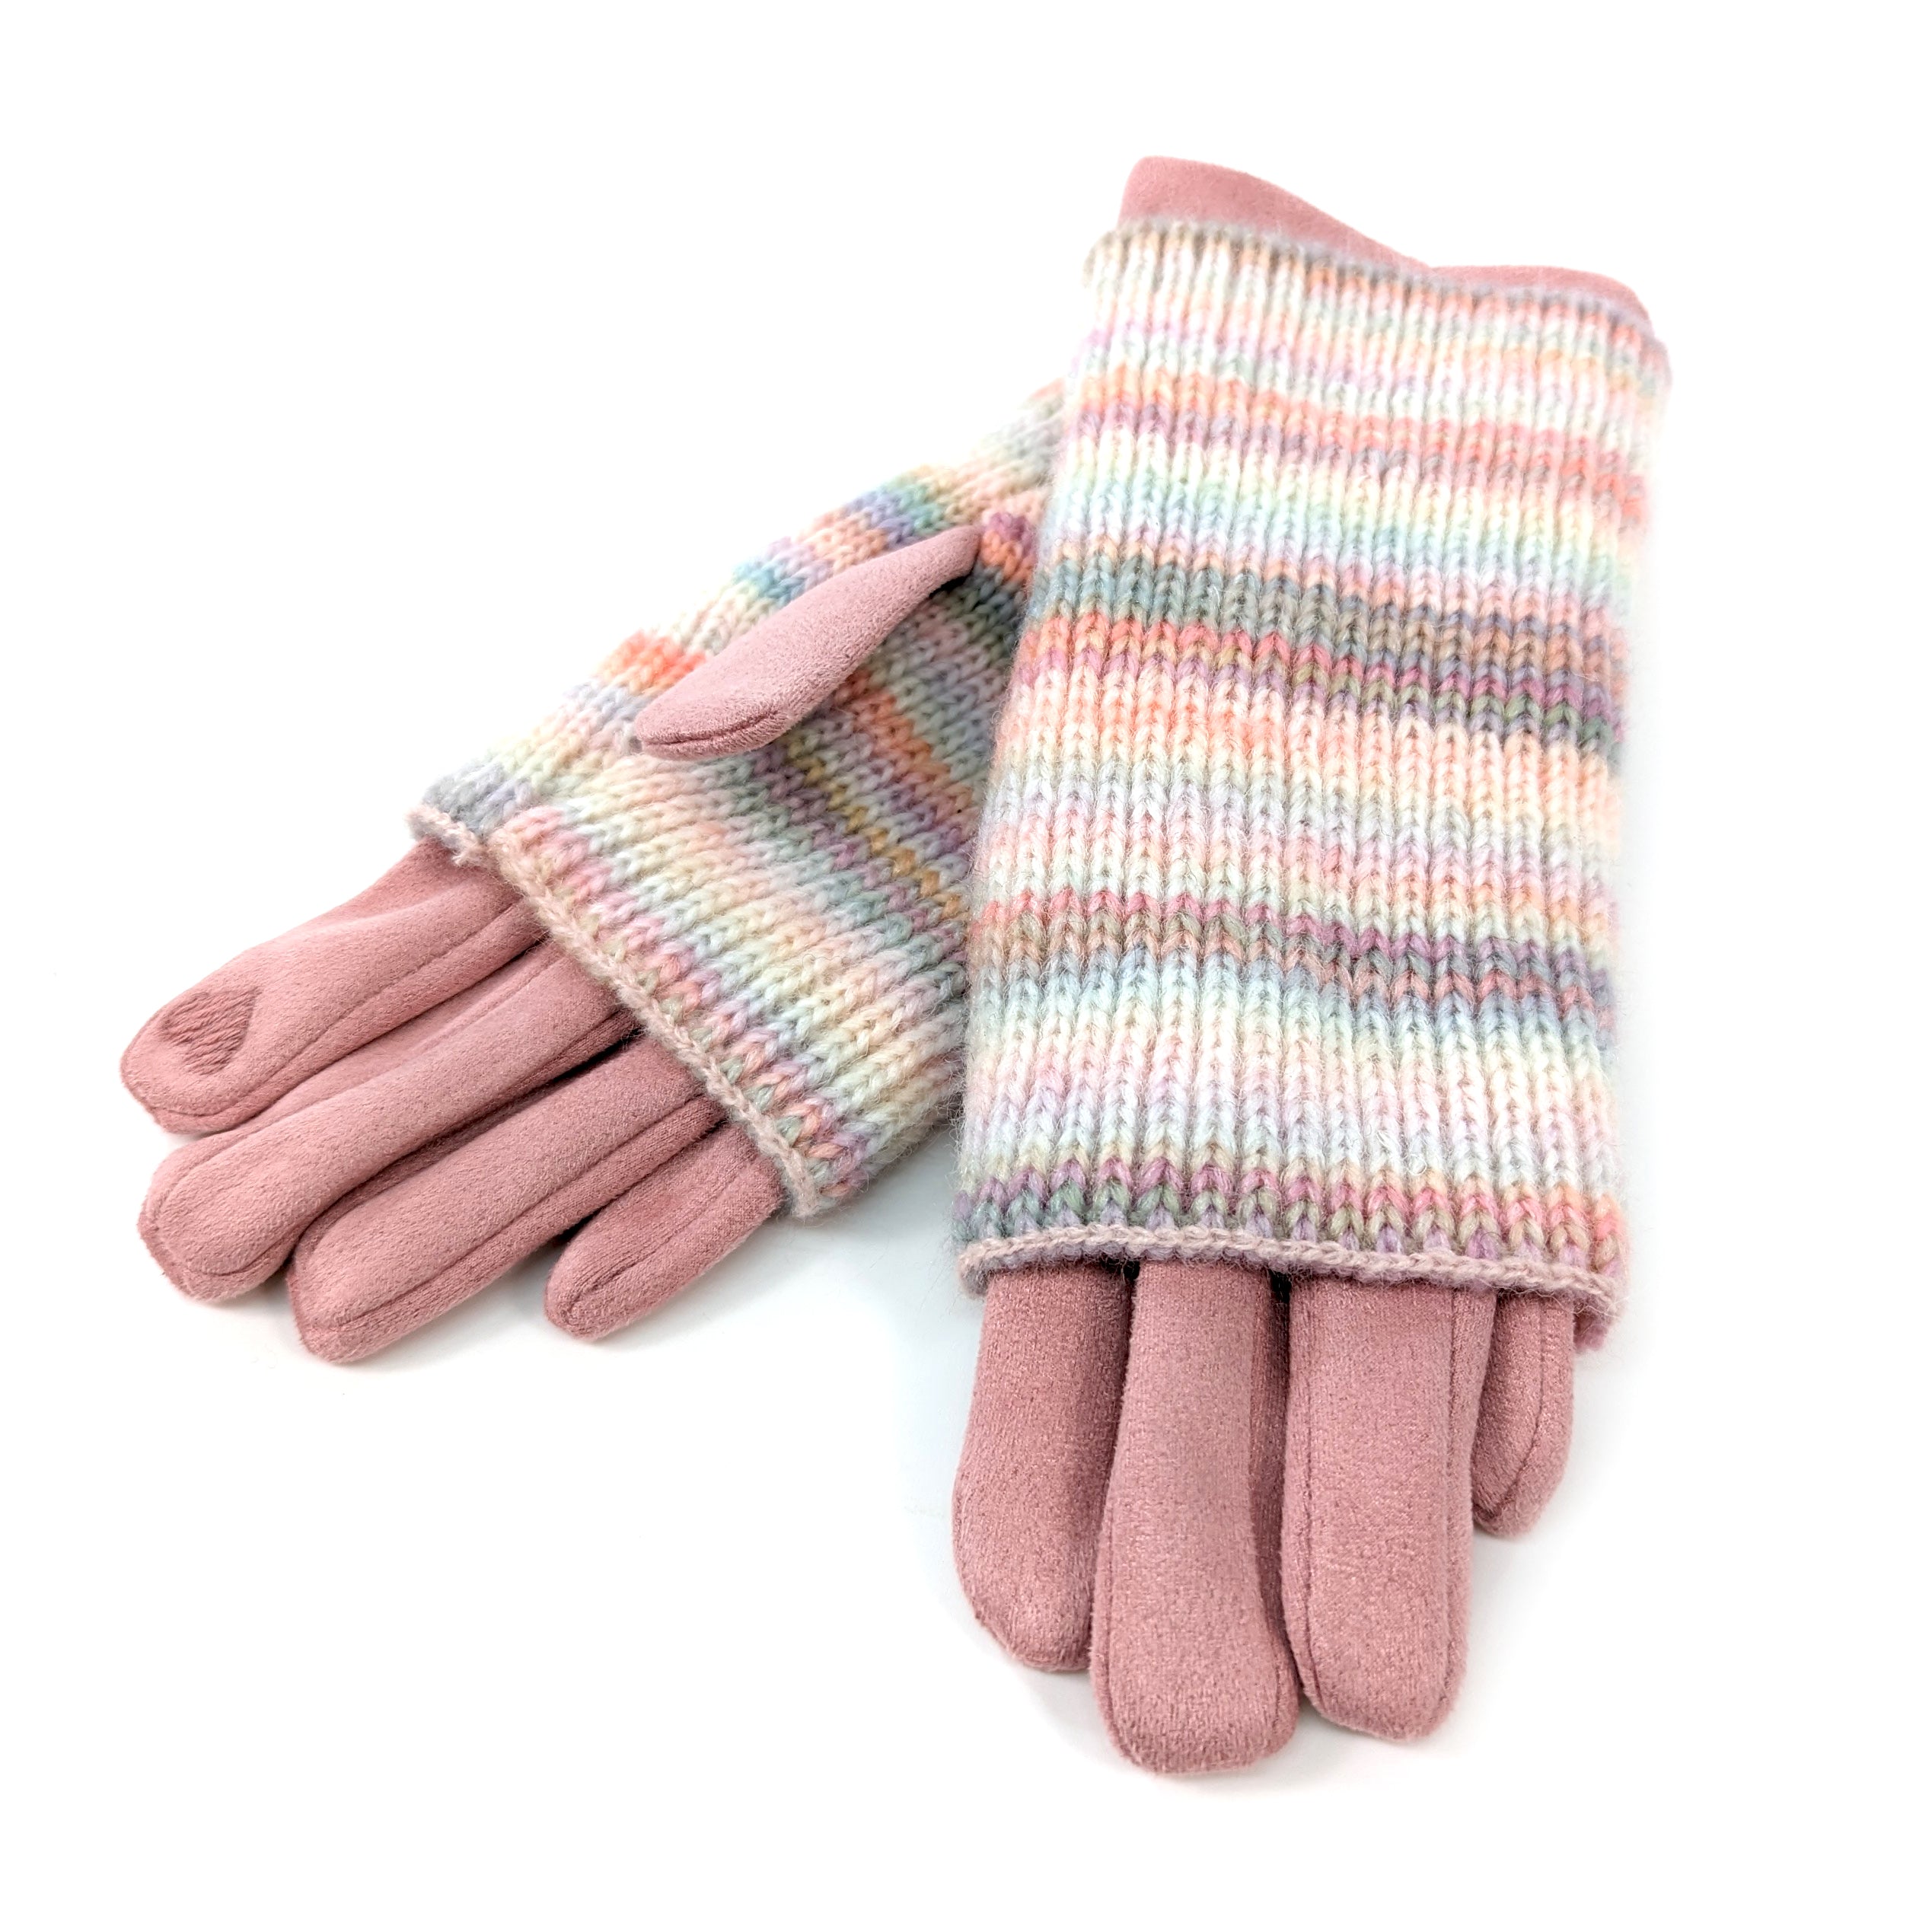 Multi Striped Two in One Gloves - Cosy Cloud Pink